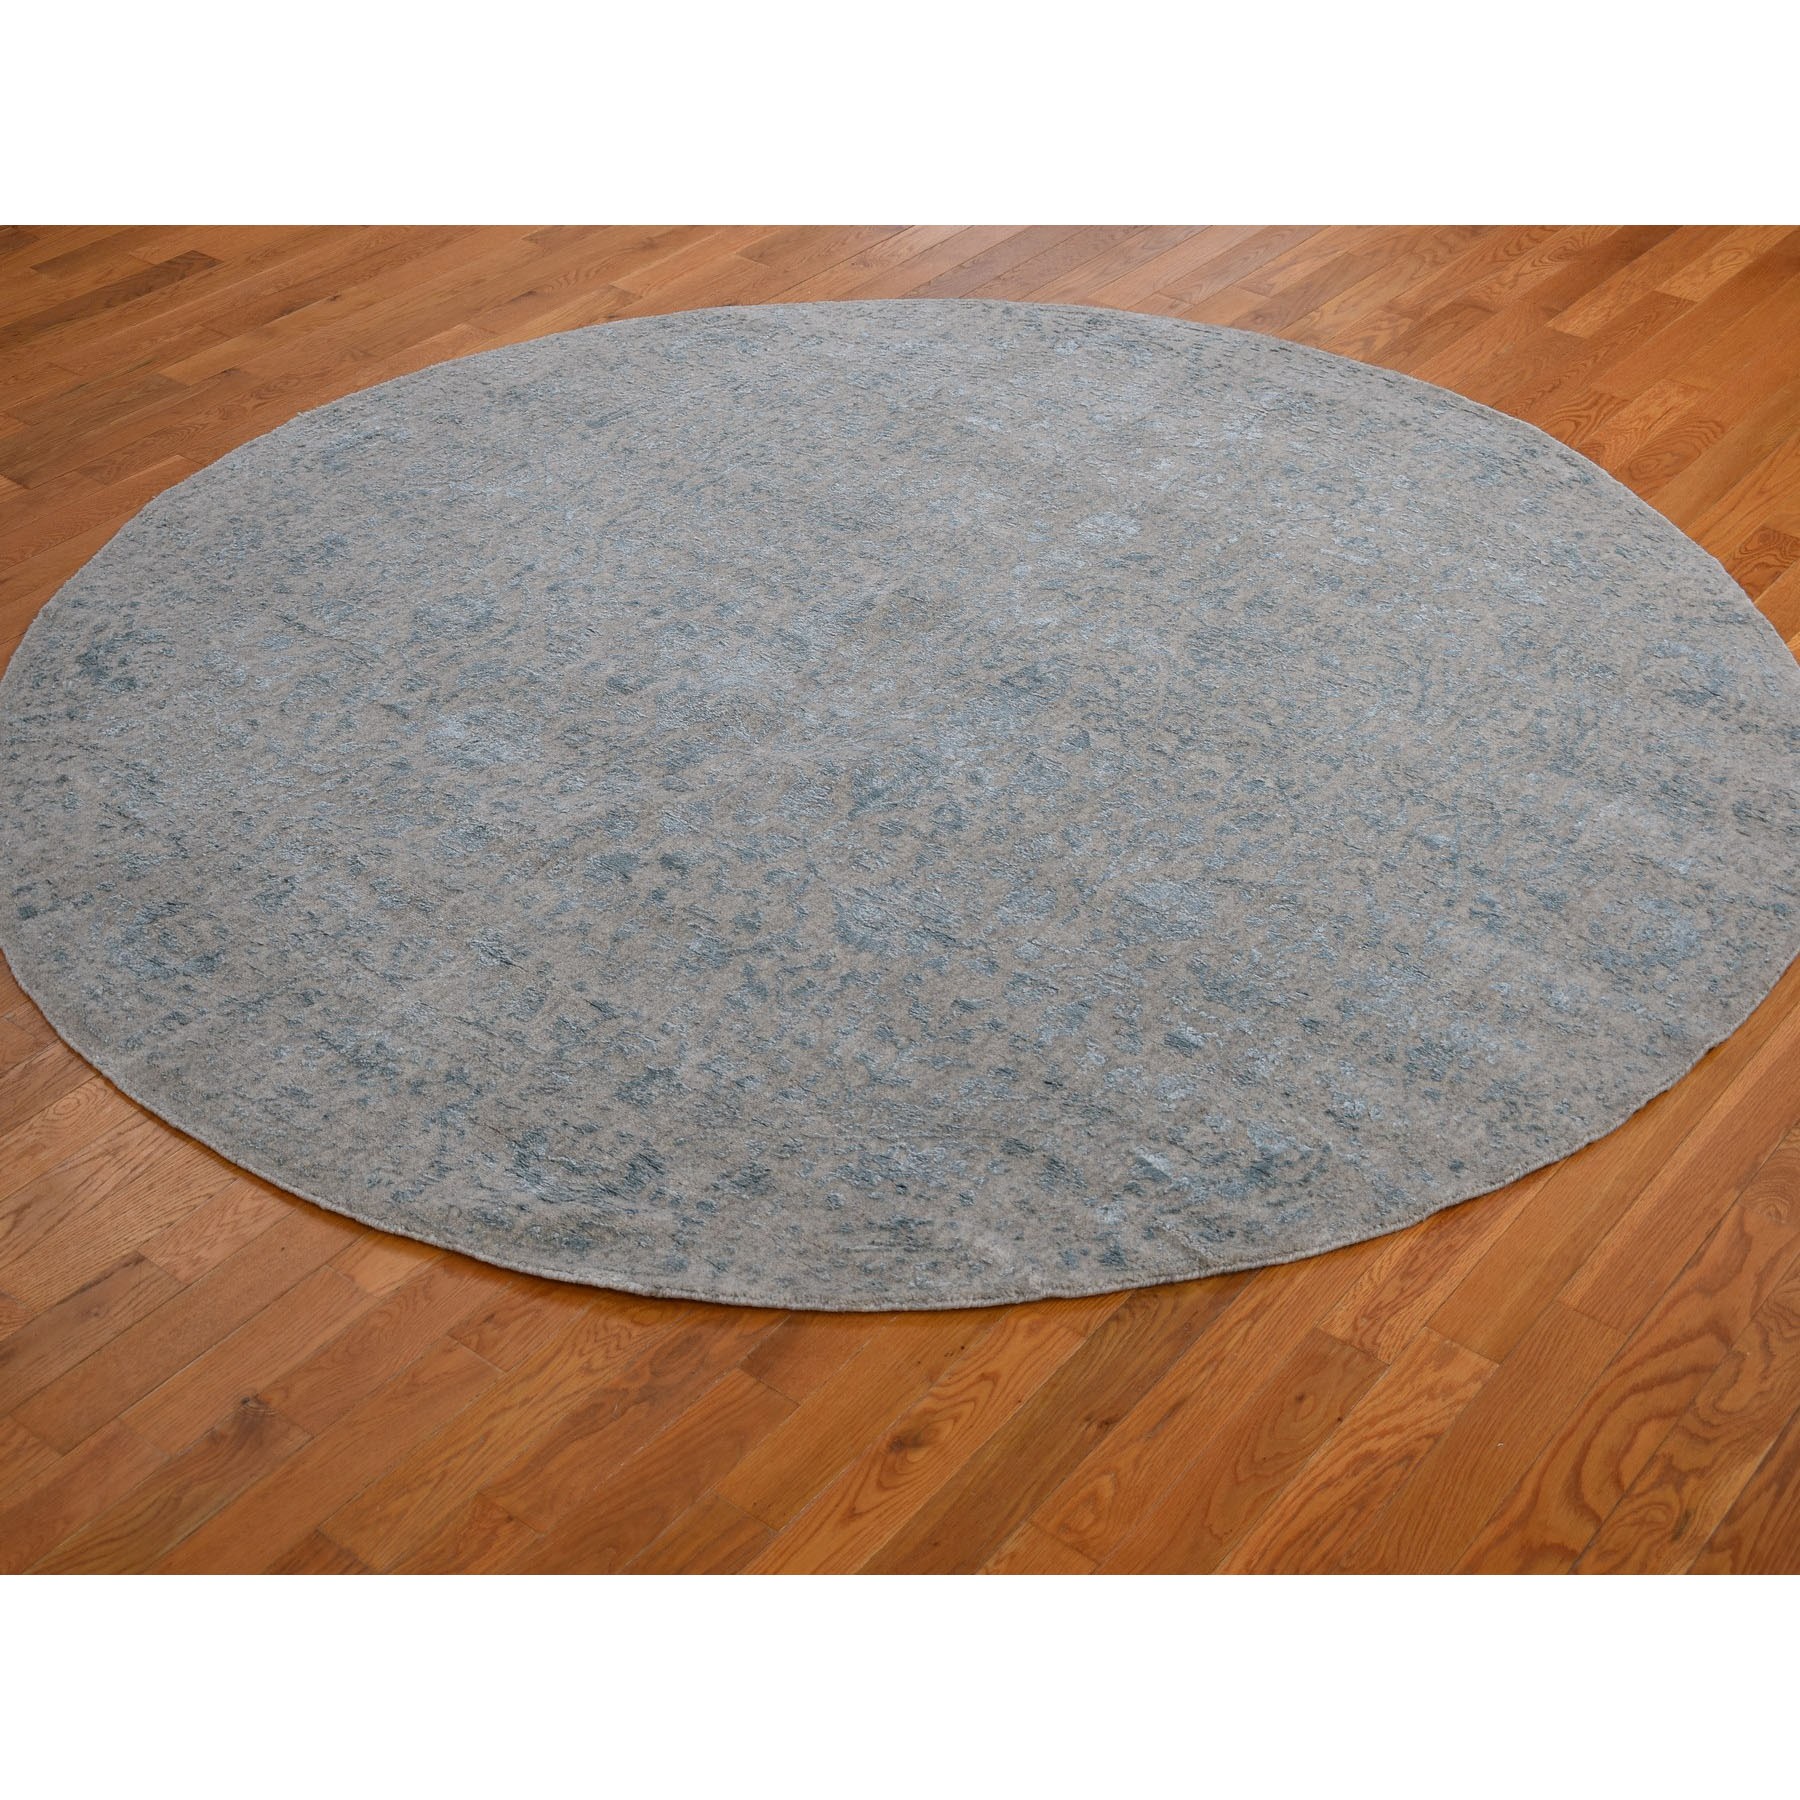 7-10 x7-10  Round Gray Broken Cypress Tree Design Wool And Silk Thick Hand Loomed Oriental Rug 